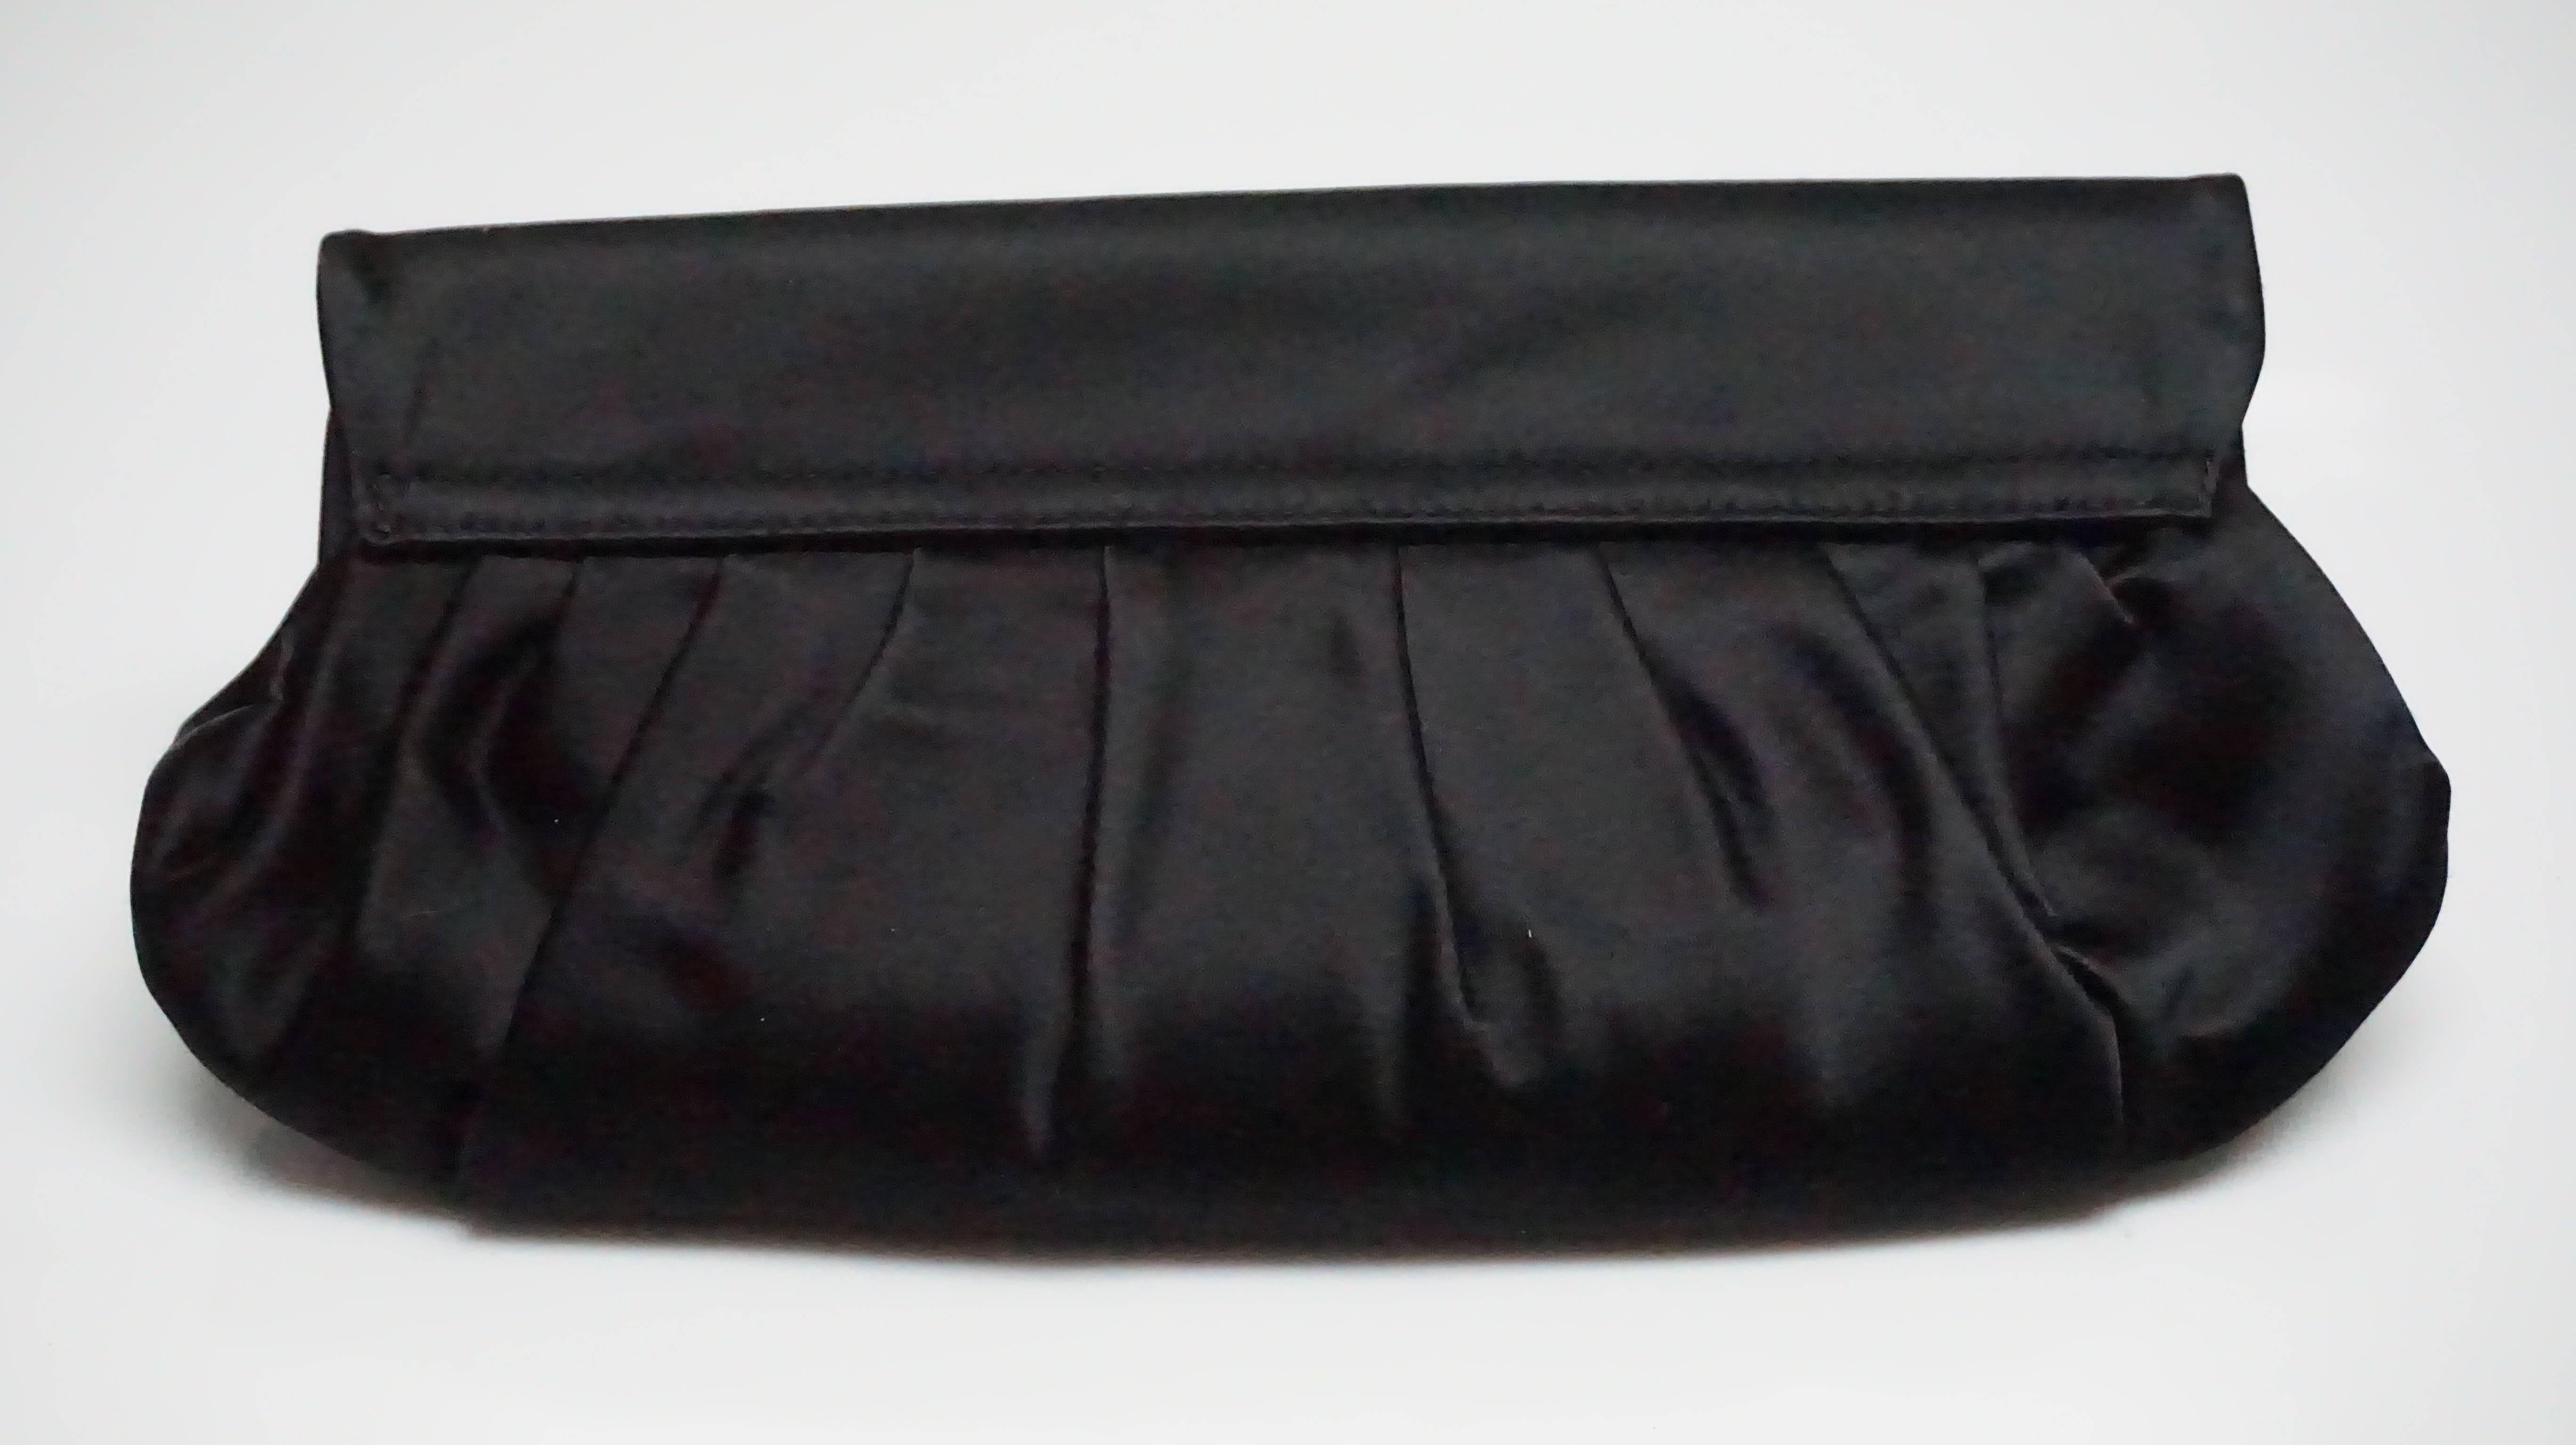 Ralph Lauren Collection Black Silk Clutch  This beautiful clutch is completely silk with two magnetic closures. It has one main compartment and one small interior pocket. It comes with a duster. This clutch is in excellent